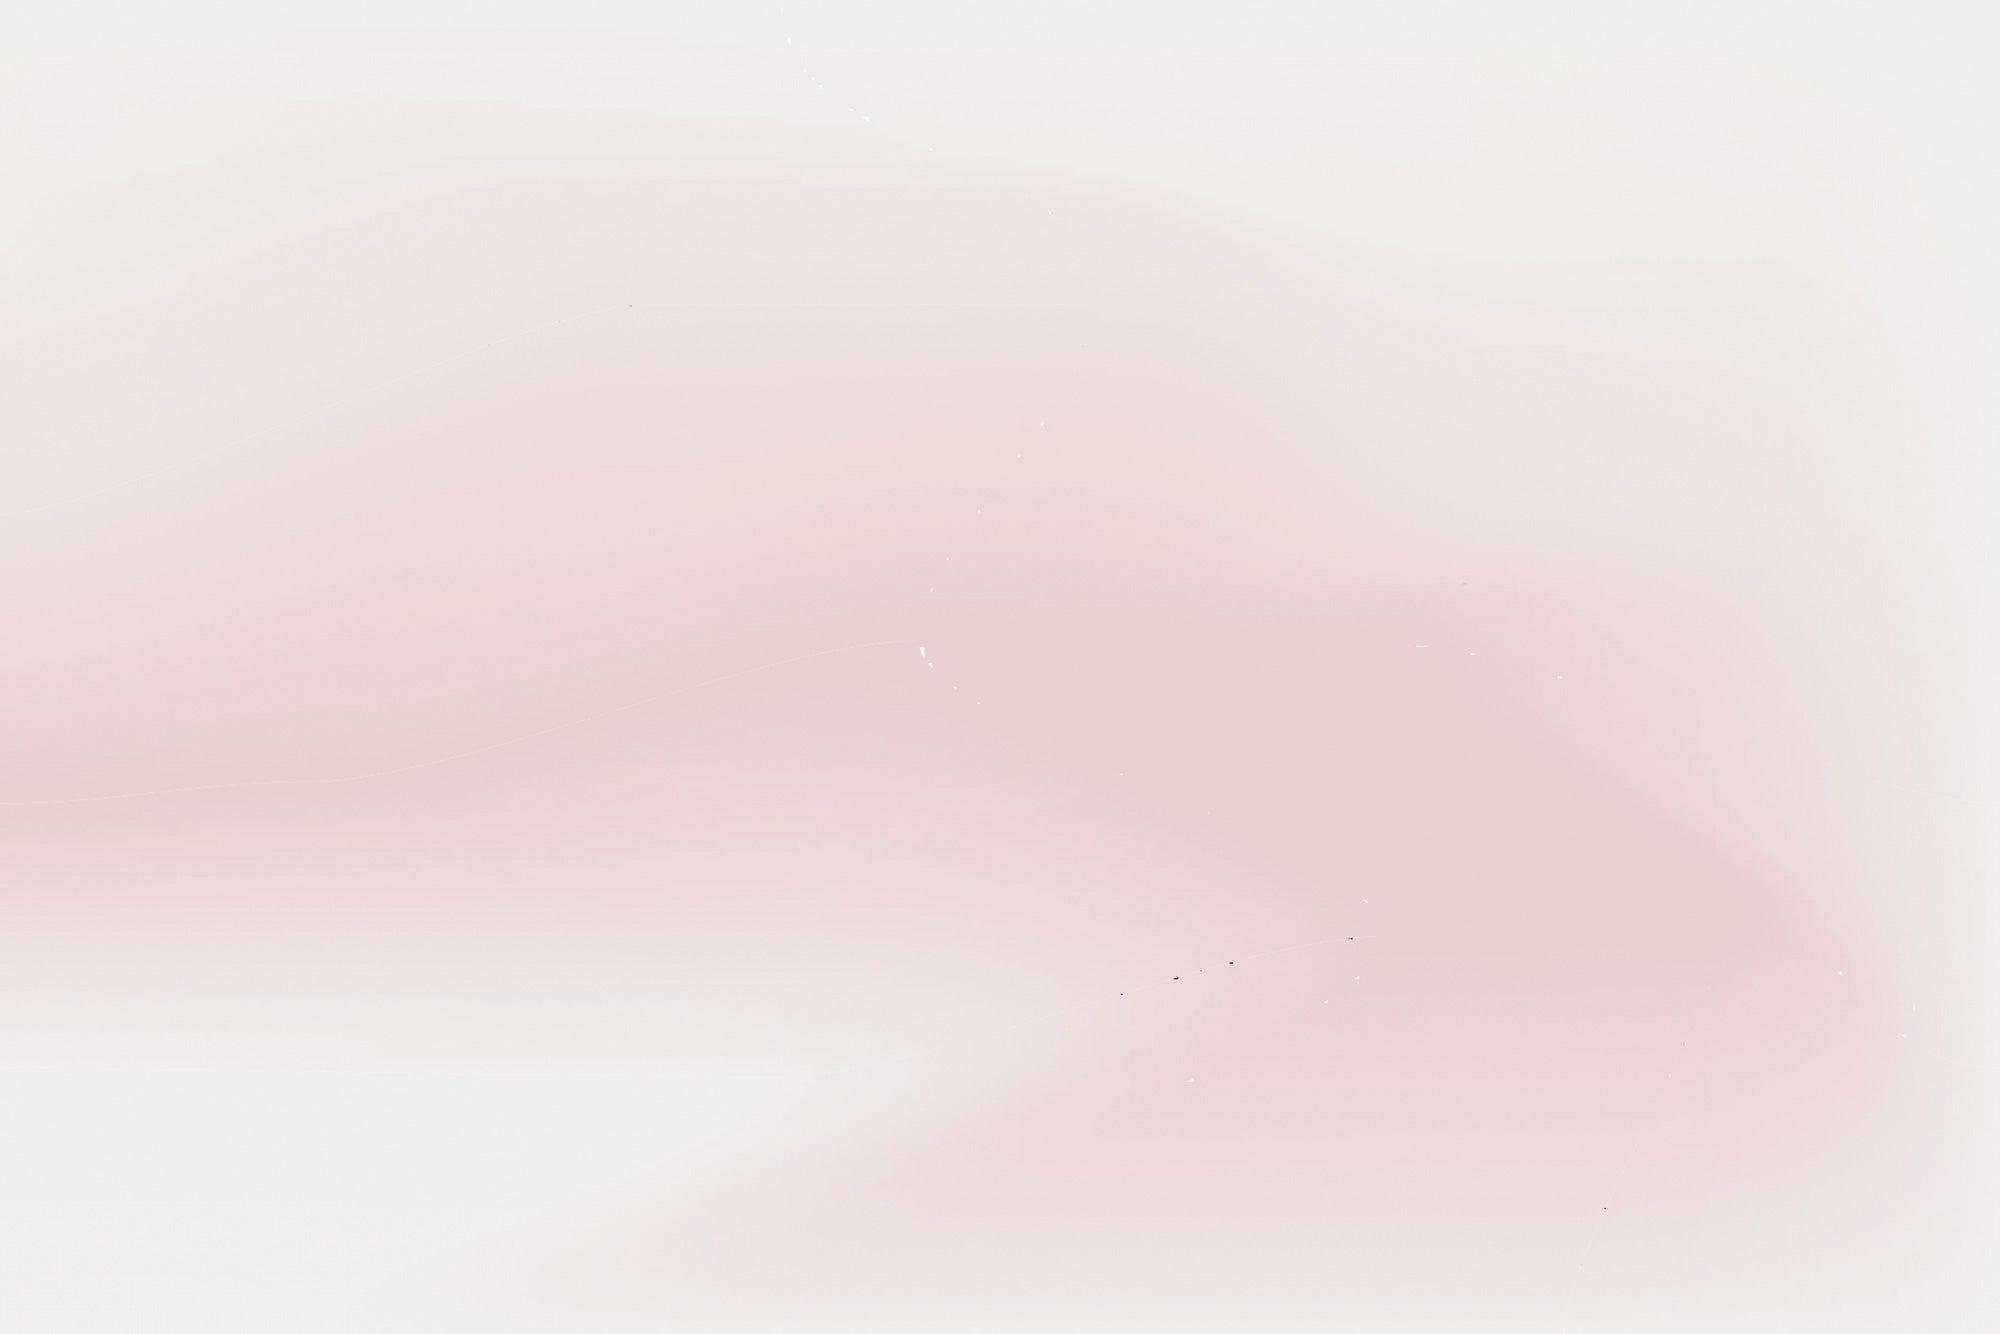 Soft Pink Gradient #2 Wall Mural, Abstract Wallpaper